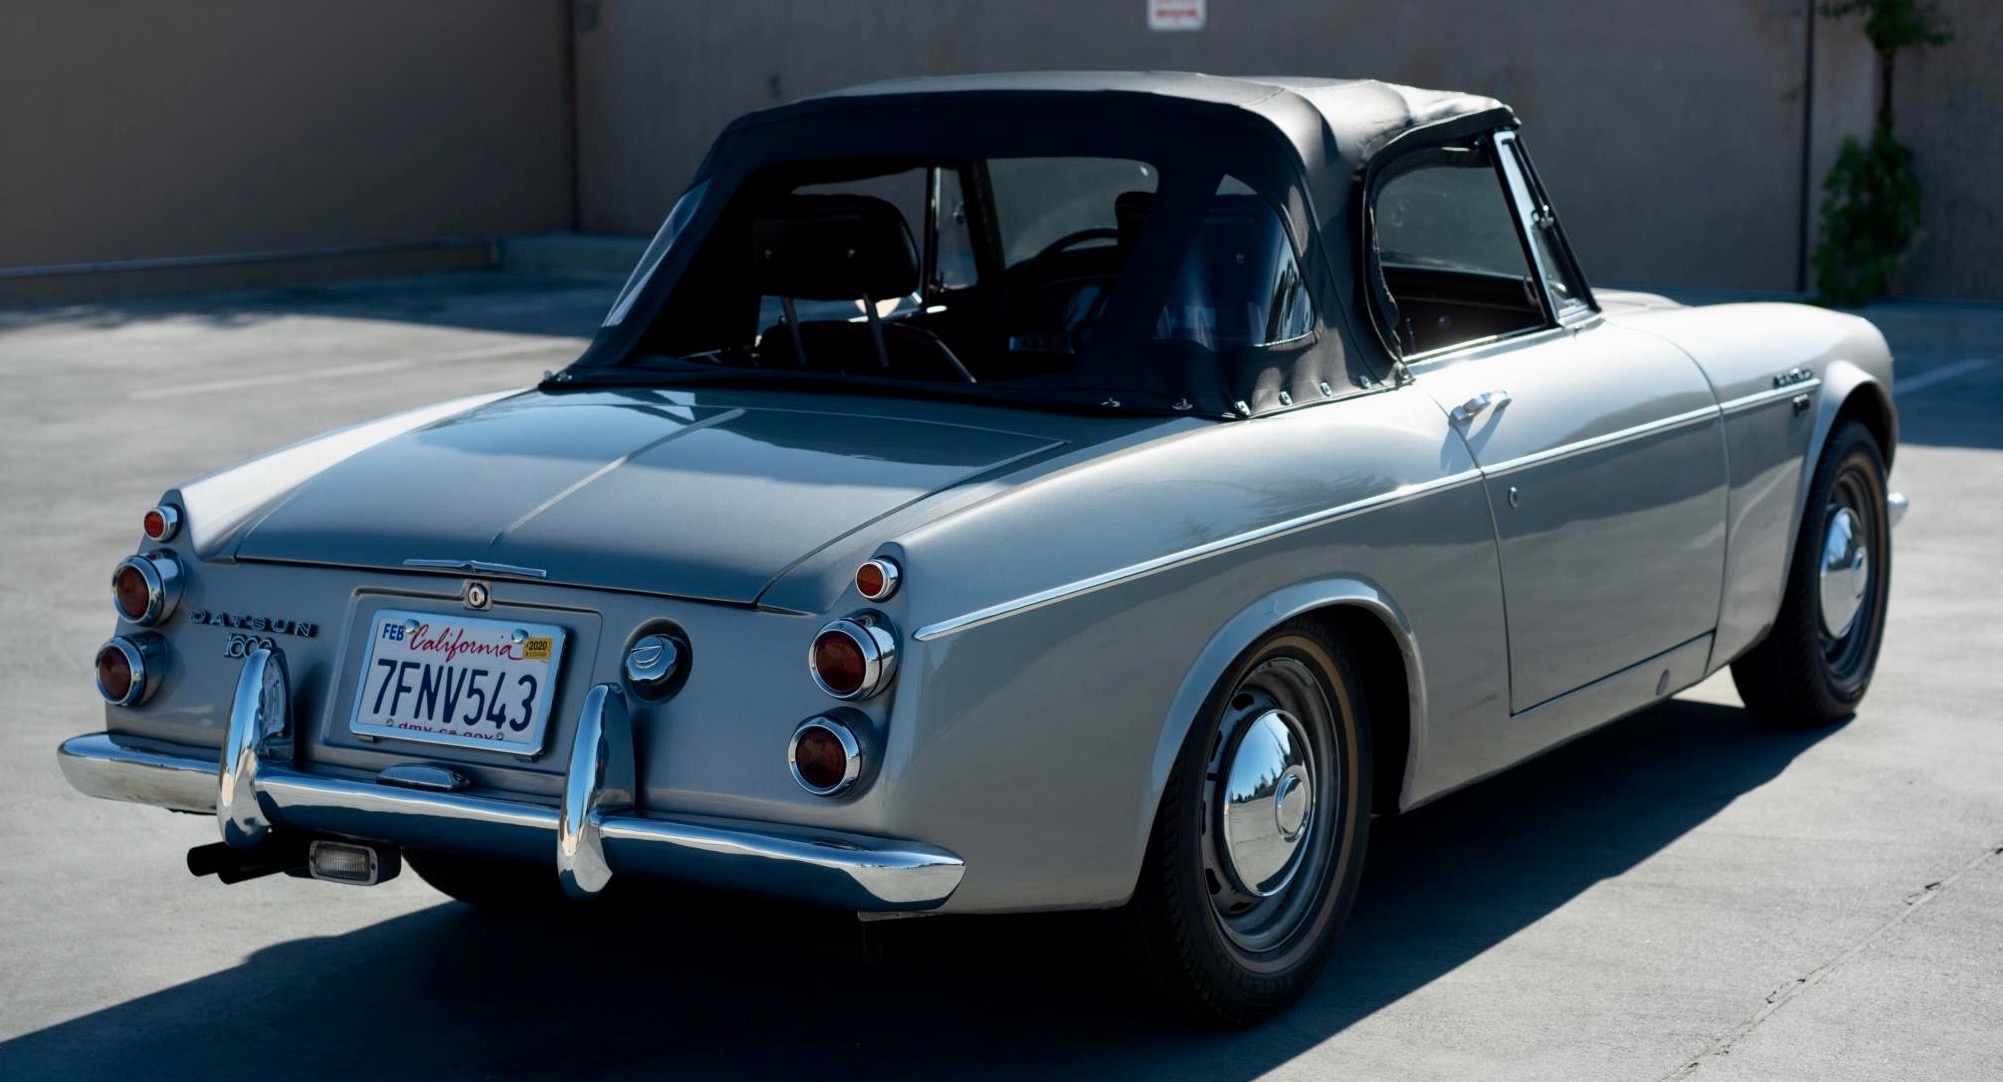 1967 Datsun 1600, Before the Z, Datsun made its name with roadsters, ClassicCars.com Journal